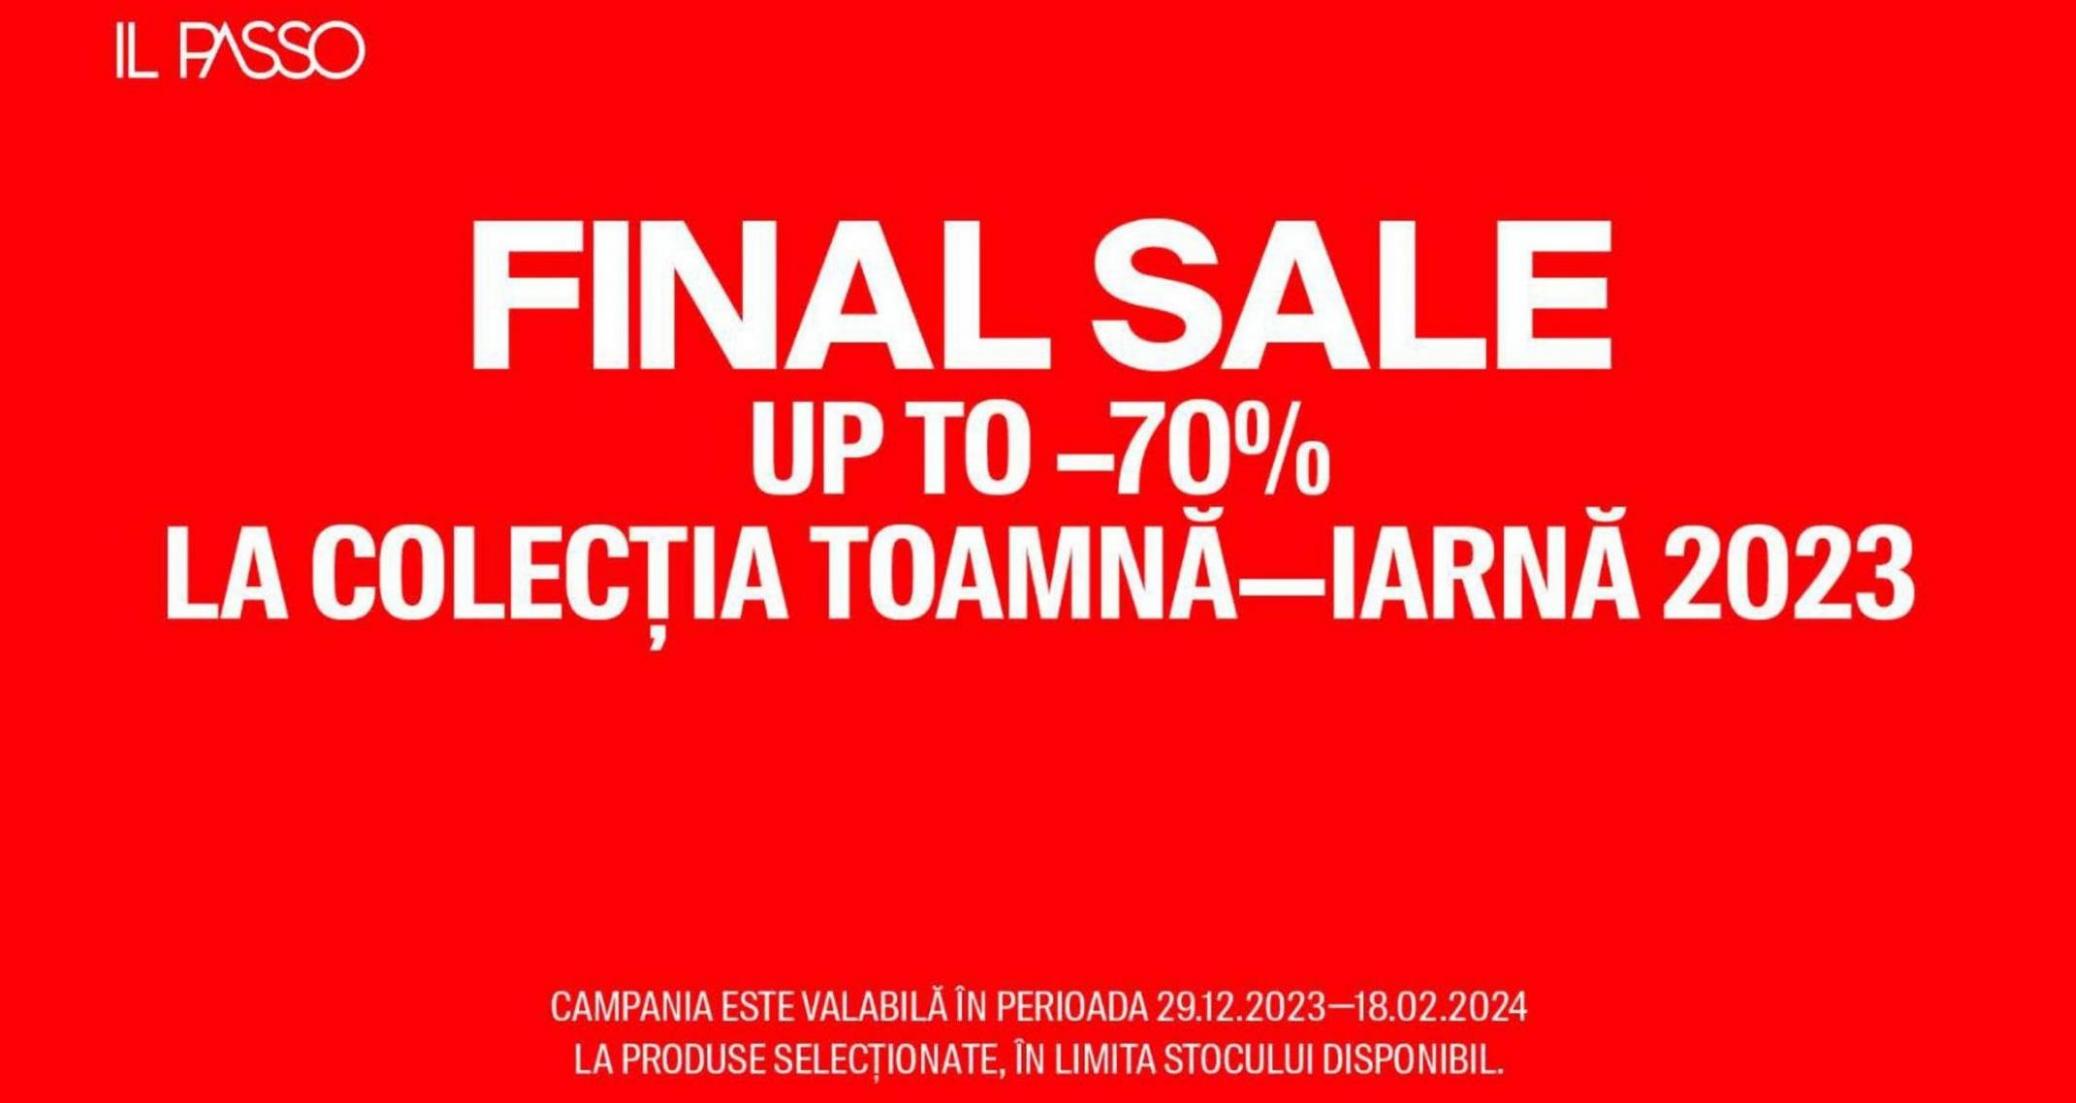 Final Sale Up To -70%. Il Passo (2024-02-18-2024-02-18)